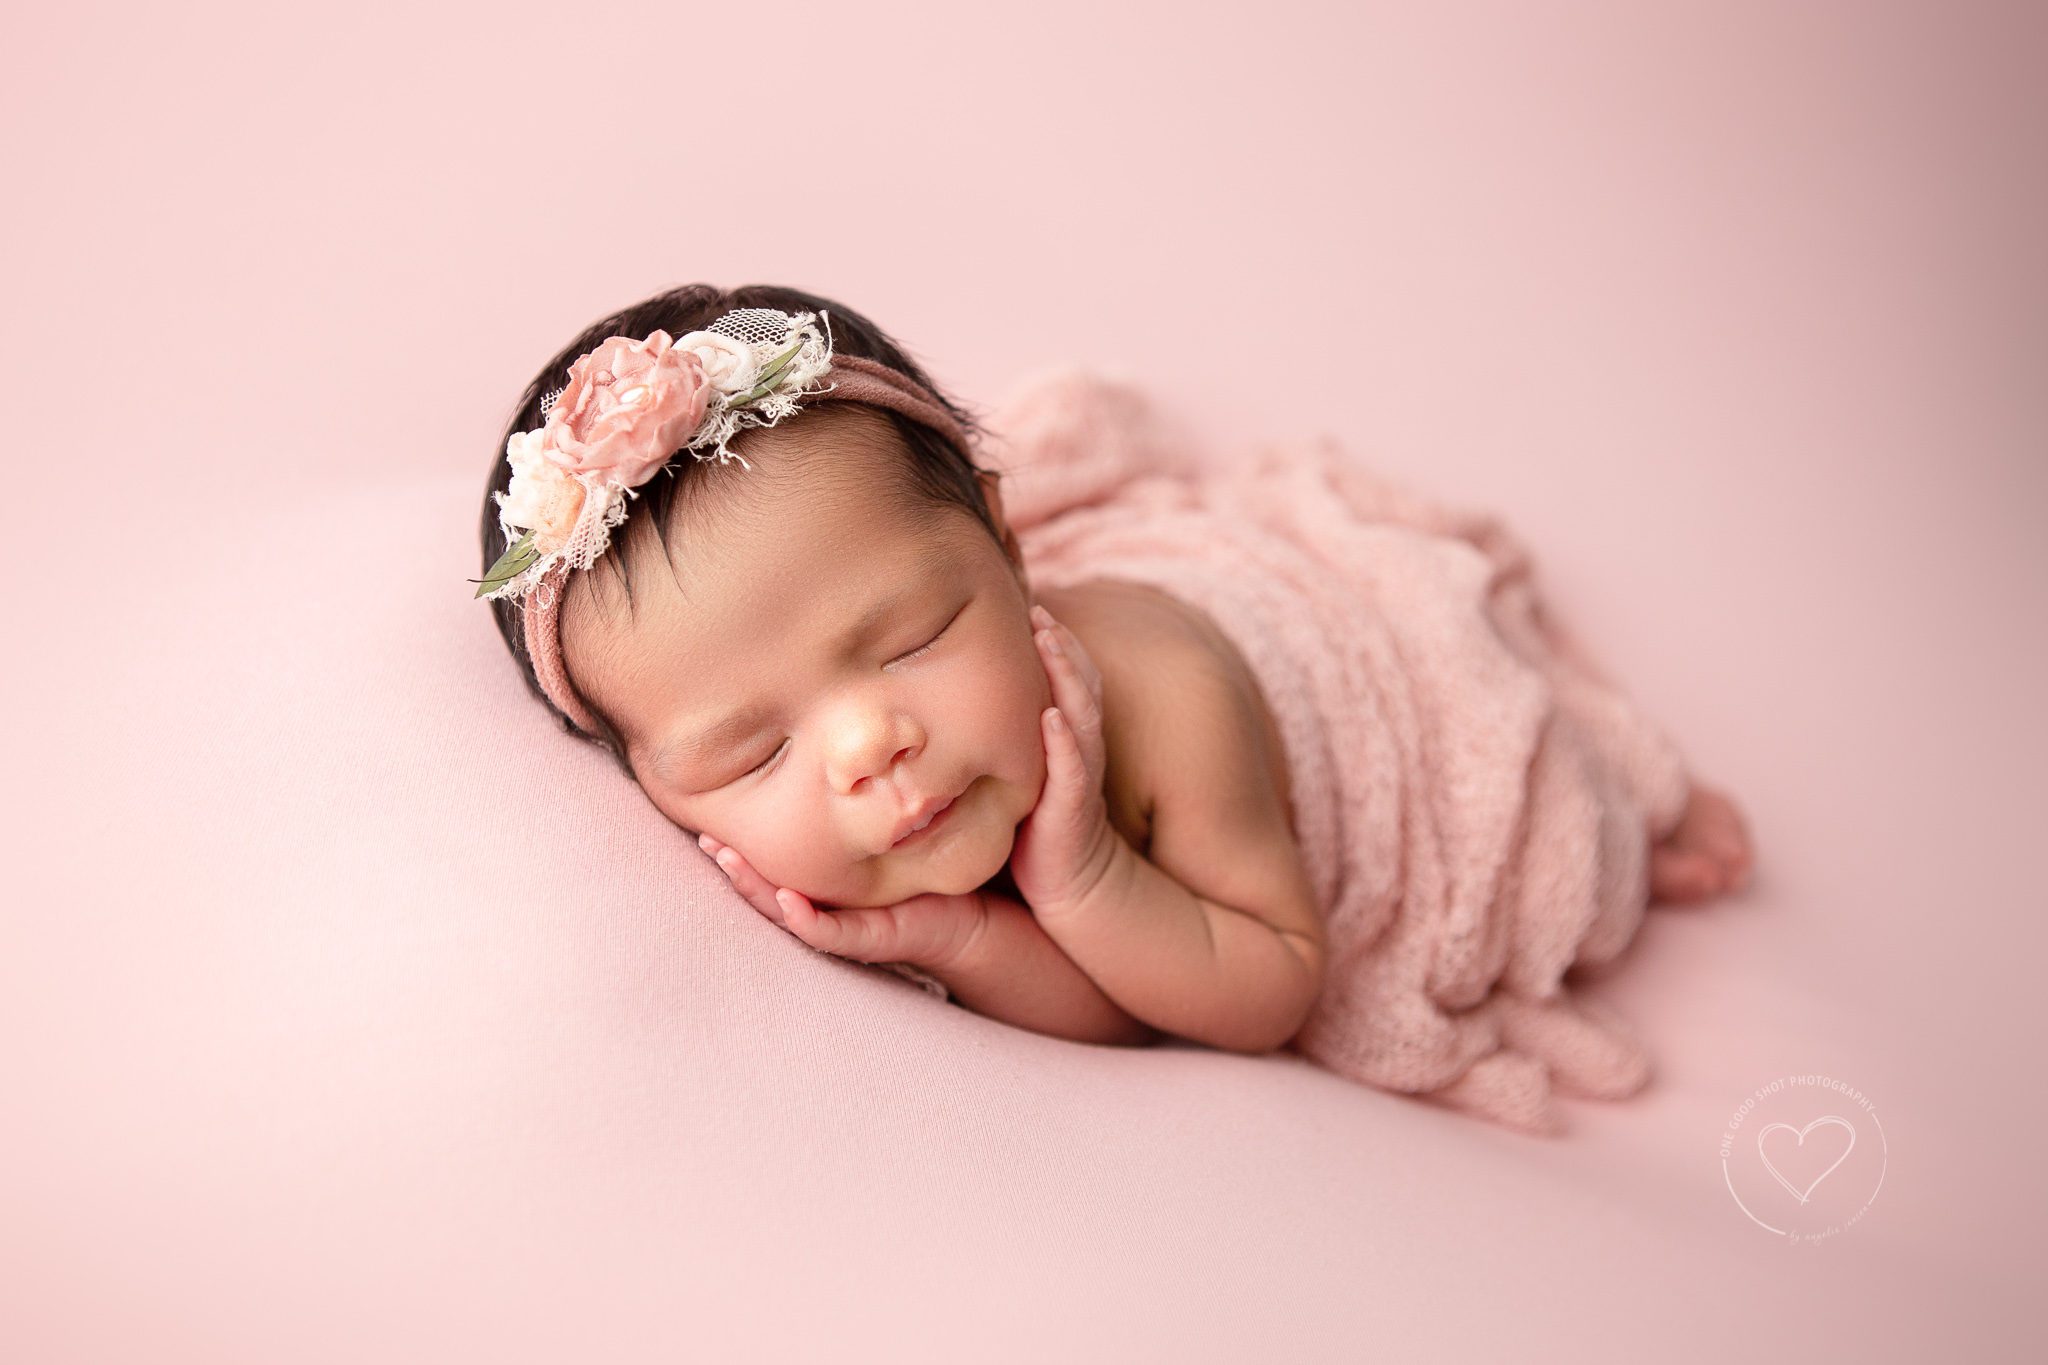 Newborn girl in side lying pose with hands on cheeks.  Pink wrap, pink backdrop, pink floral headband